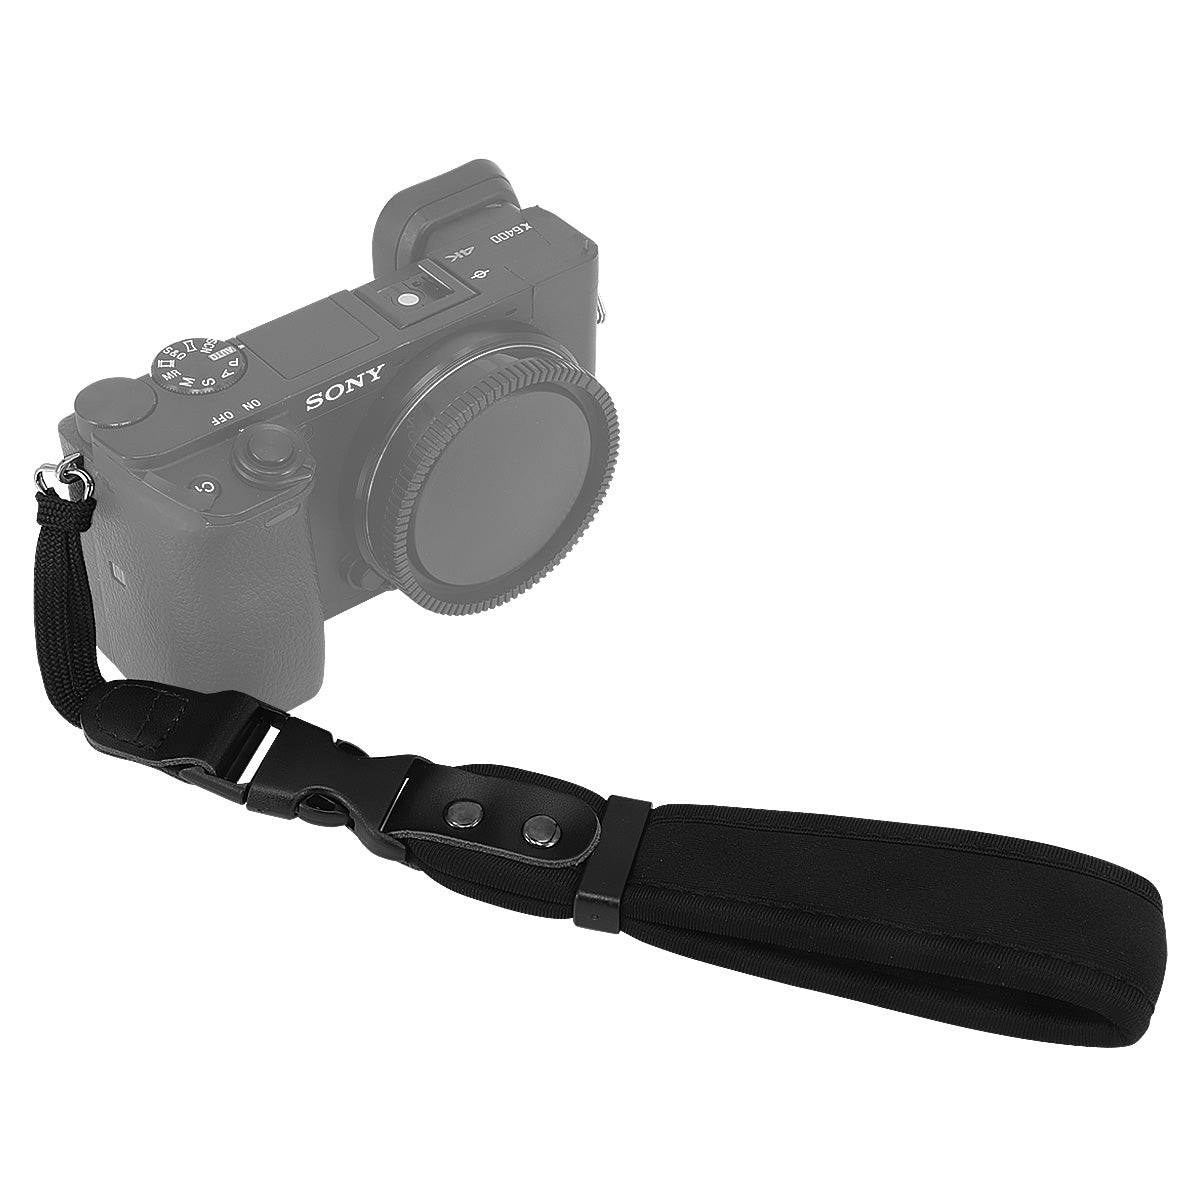 Haoge Camera Hand Wrist Strap with 2 Connections for Canon Nikon Sony Fujifilm Panasonic Ricoh DSLR SLR Mirrorless Point & Shoot Cameras